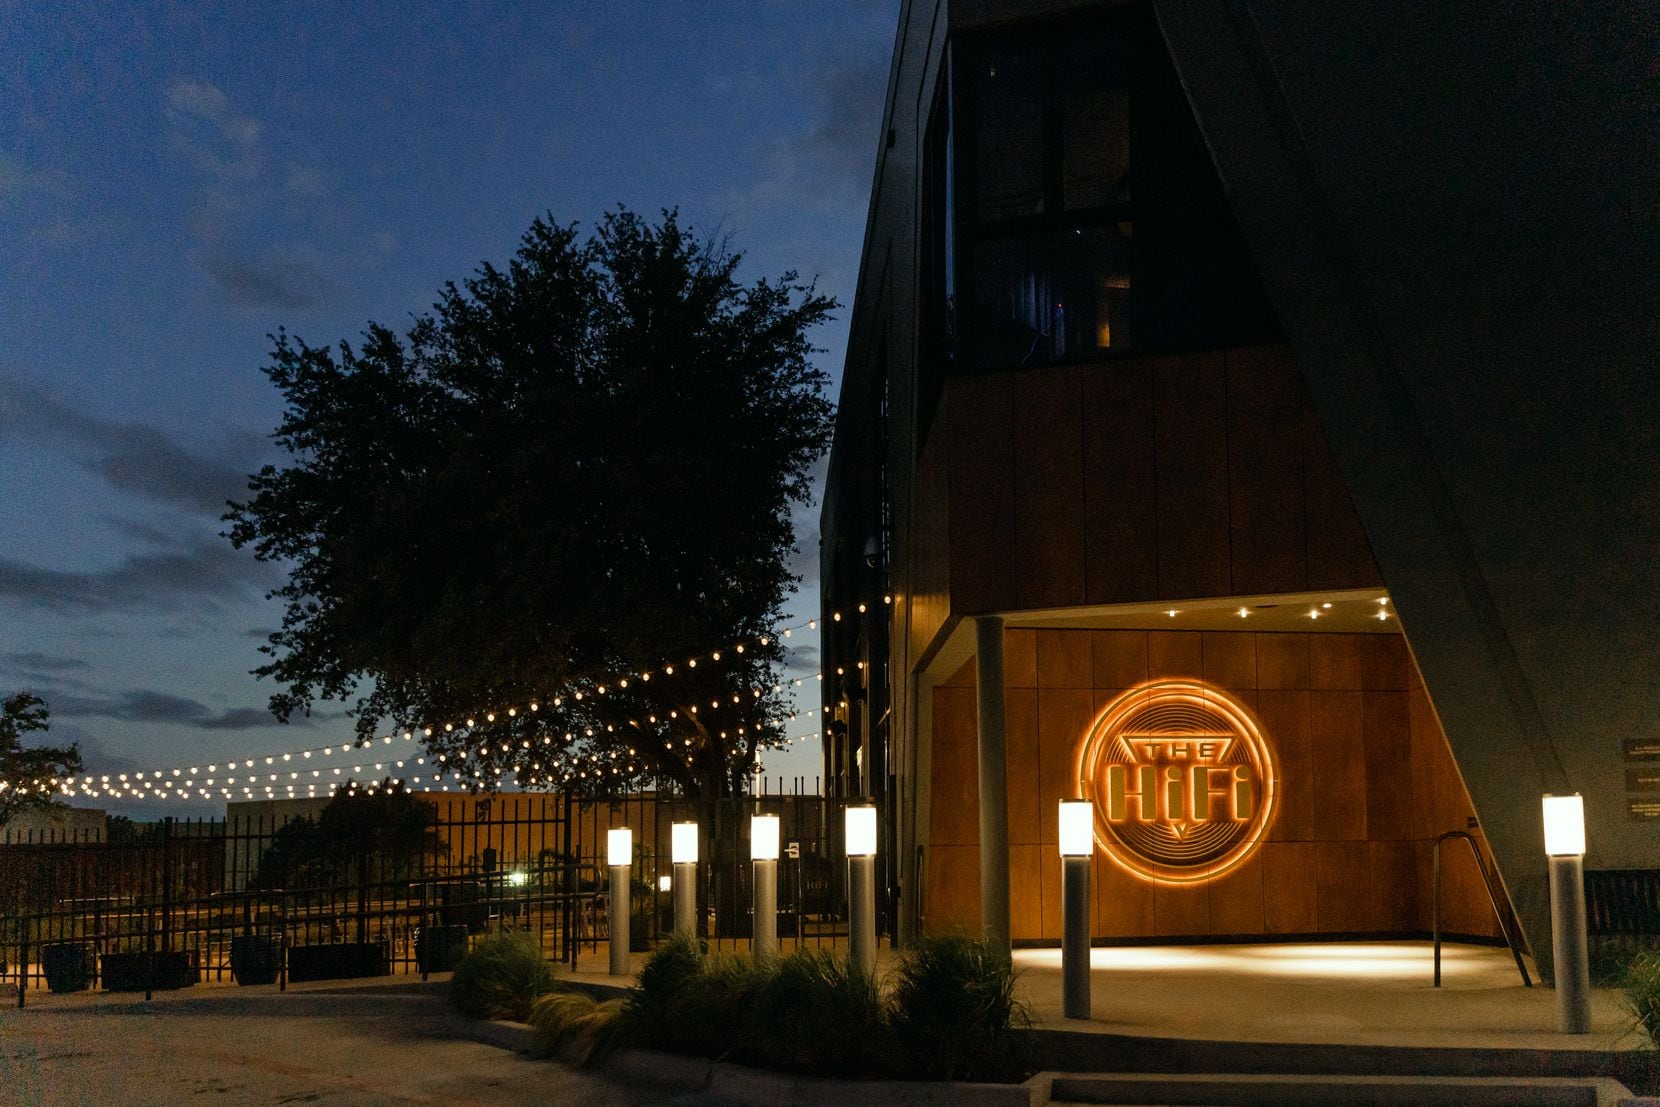 The HiFi Dallas — whose name has been changed to The Echo Lounge & Music Hall, is a new...